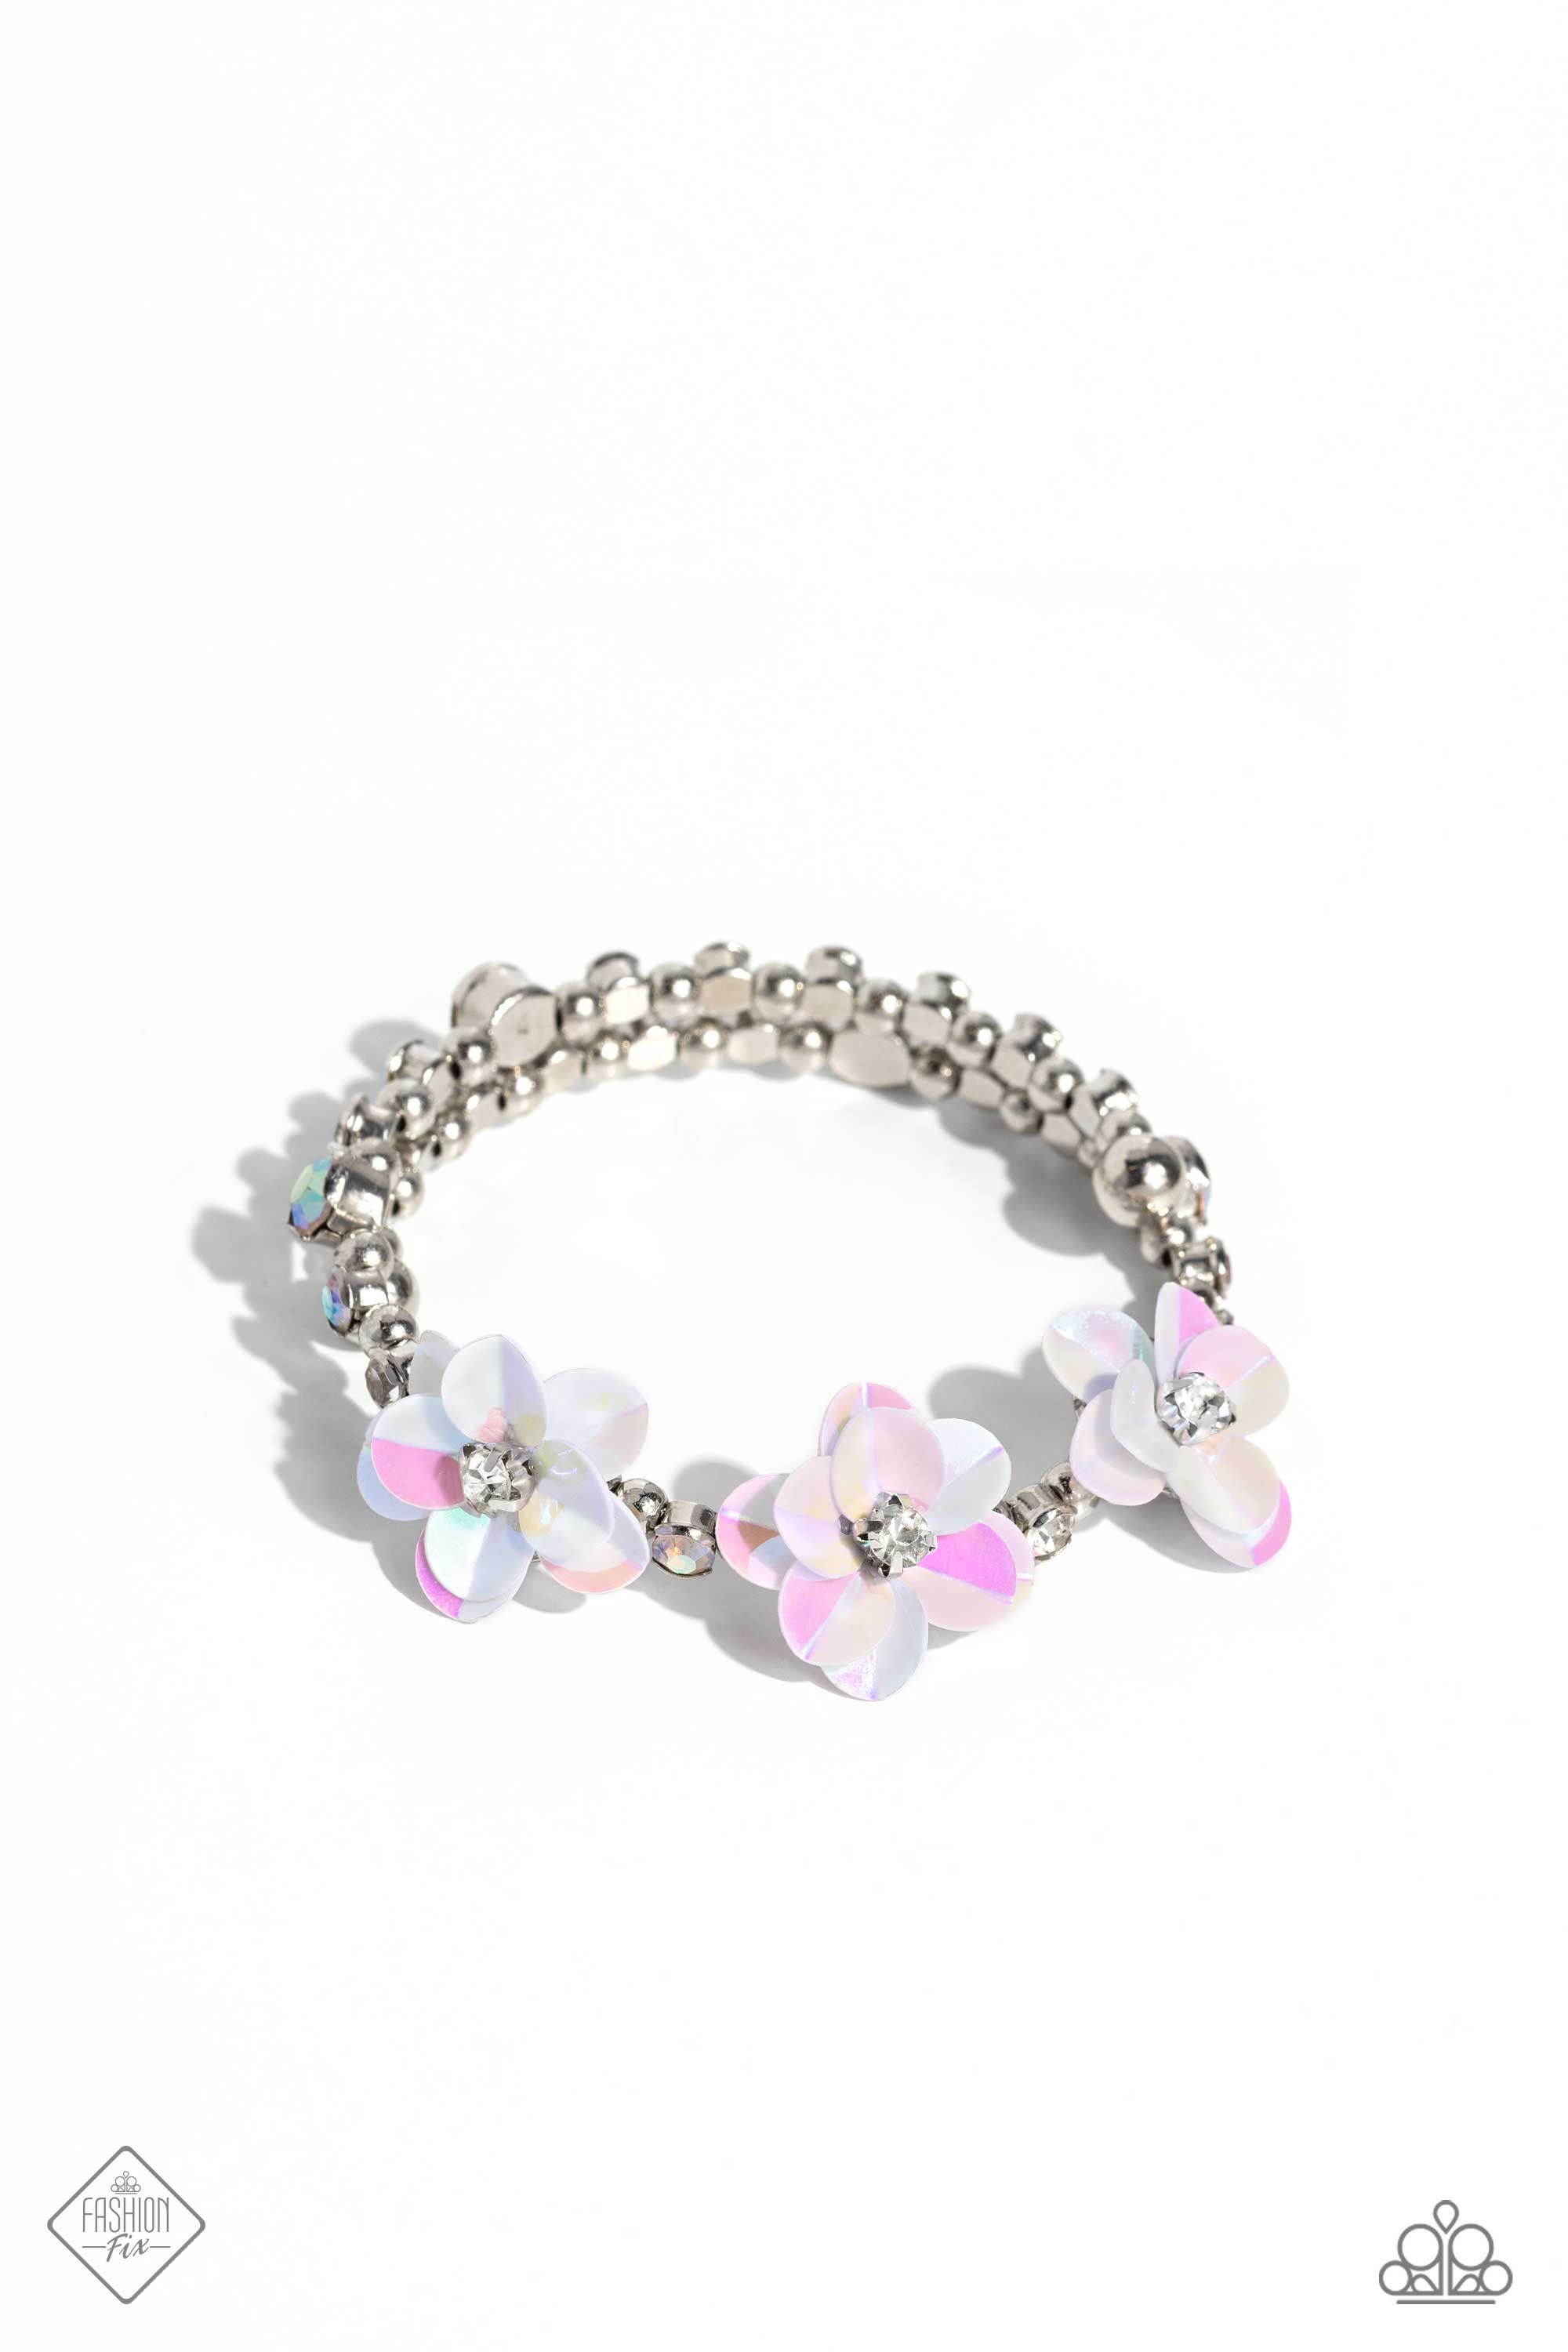 Endlessly Ethereal Multi Floral Coil Bracelet - Paparazzi Accessories- lightbox - CarasShop.com - $5 Jewelry by Cara Jewels